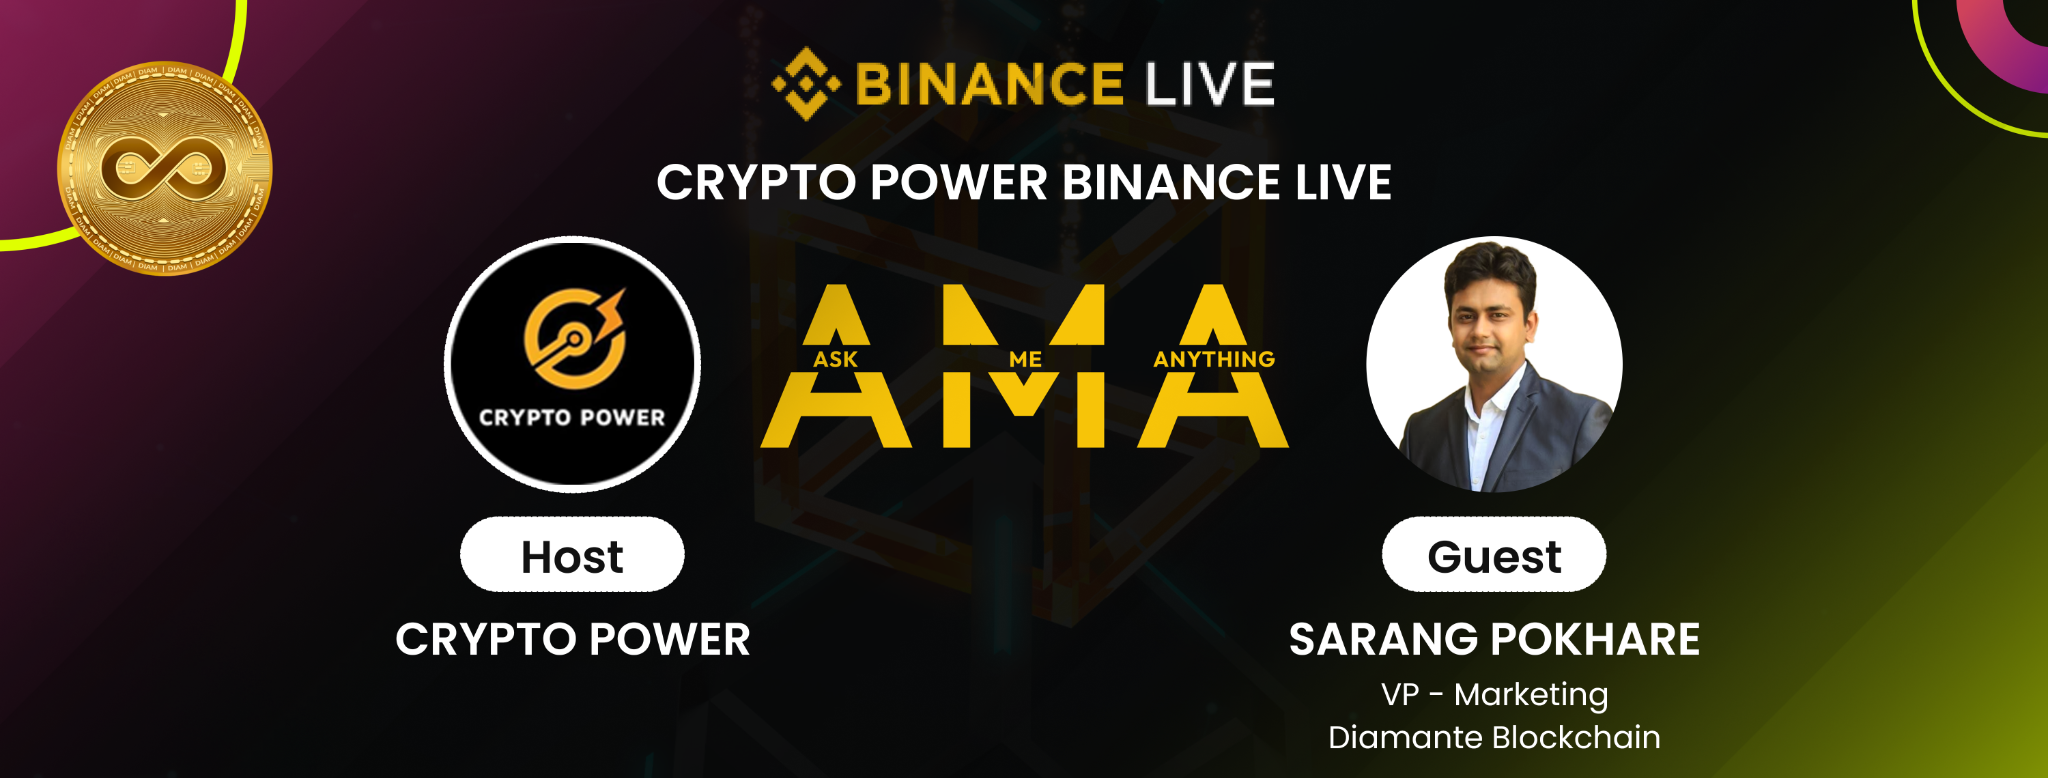 Binance Live AMA with Sarang Pokhare, VP of Marketing at Diamante Blockchain, hosted by Crypto Power